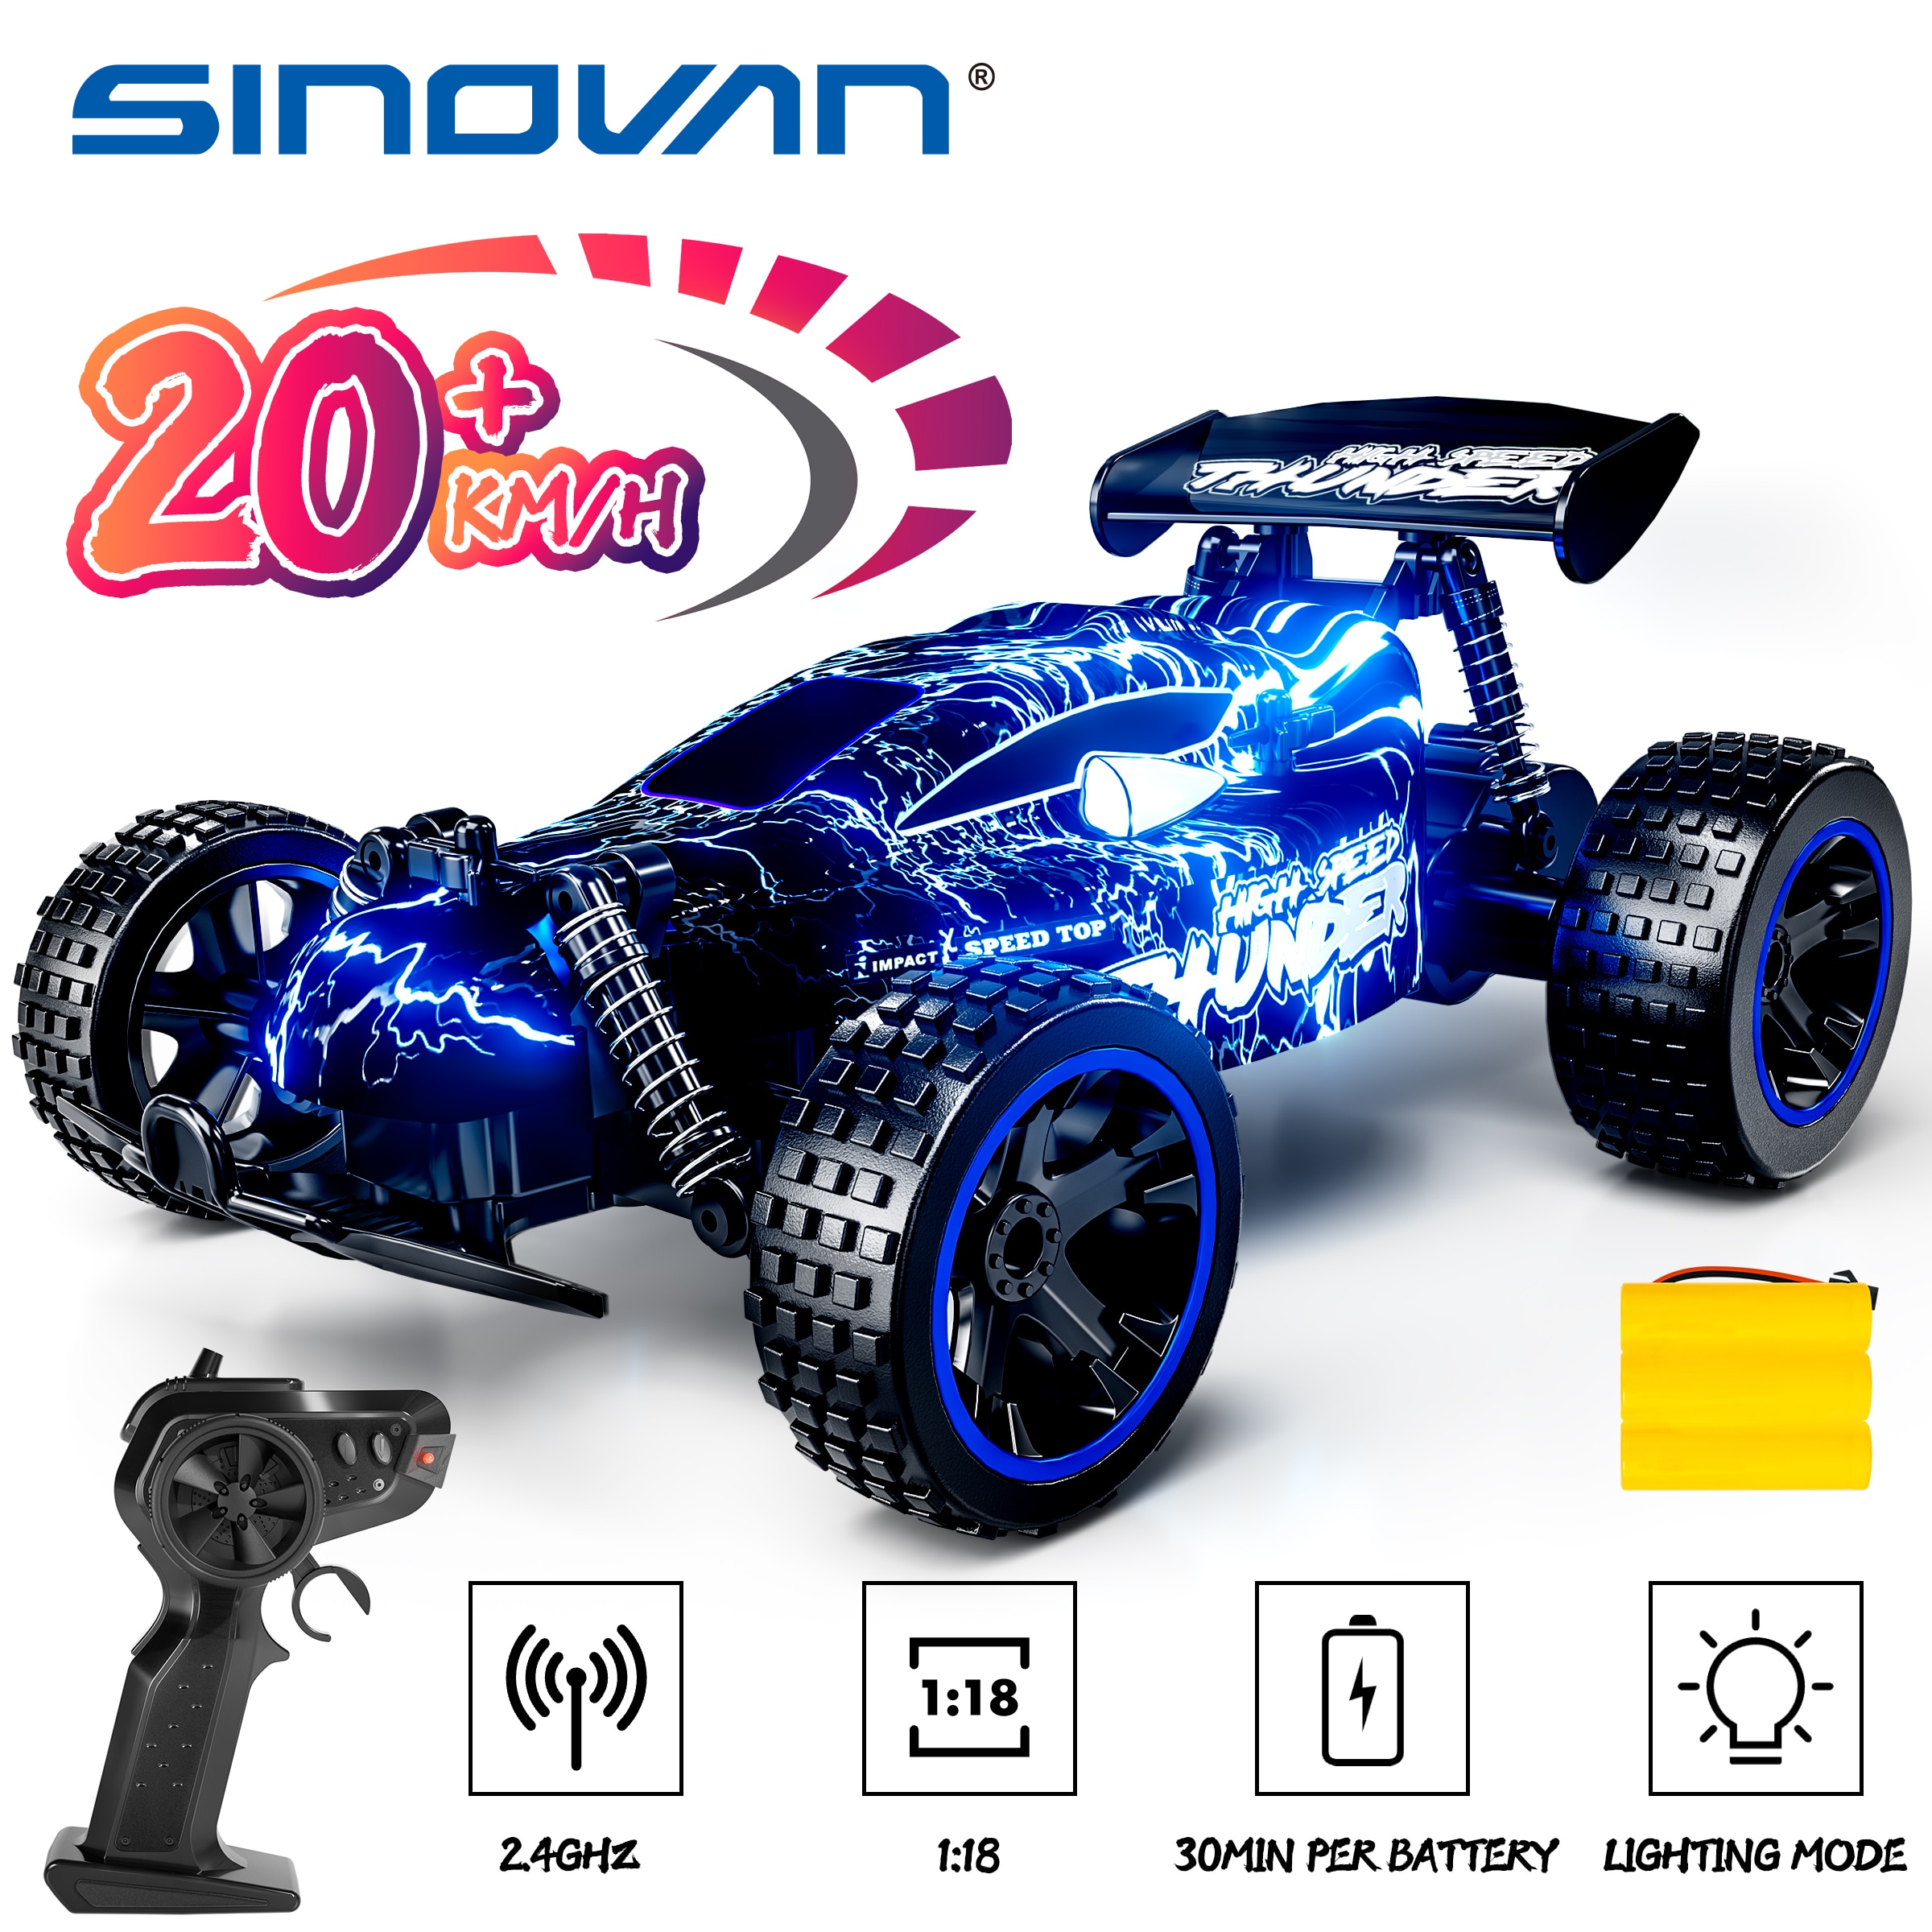 Sinovan Remote Control Cars For Kids